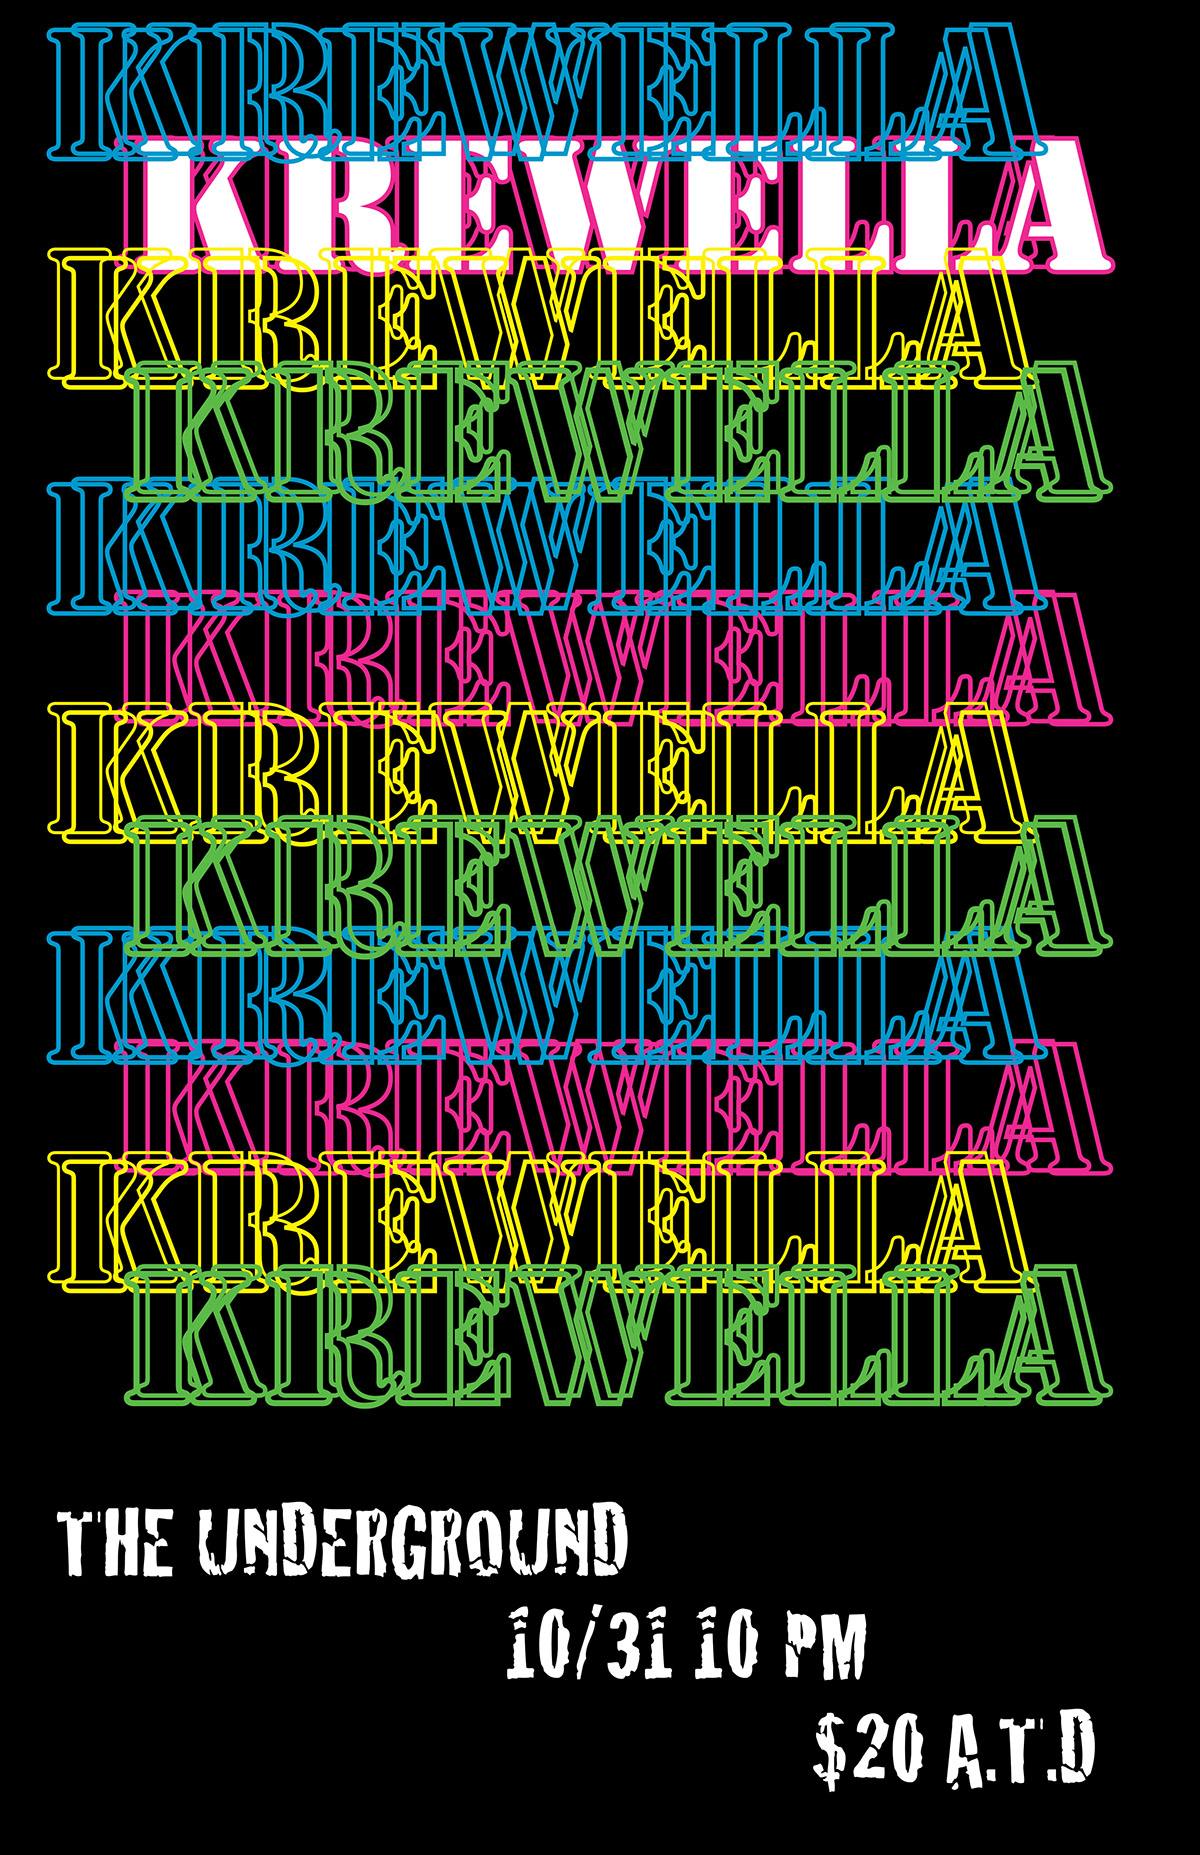 poster type krewella neon colorful